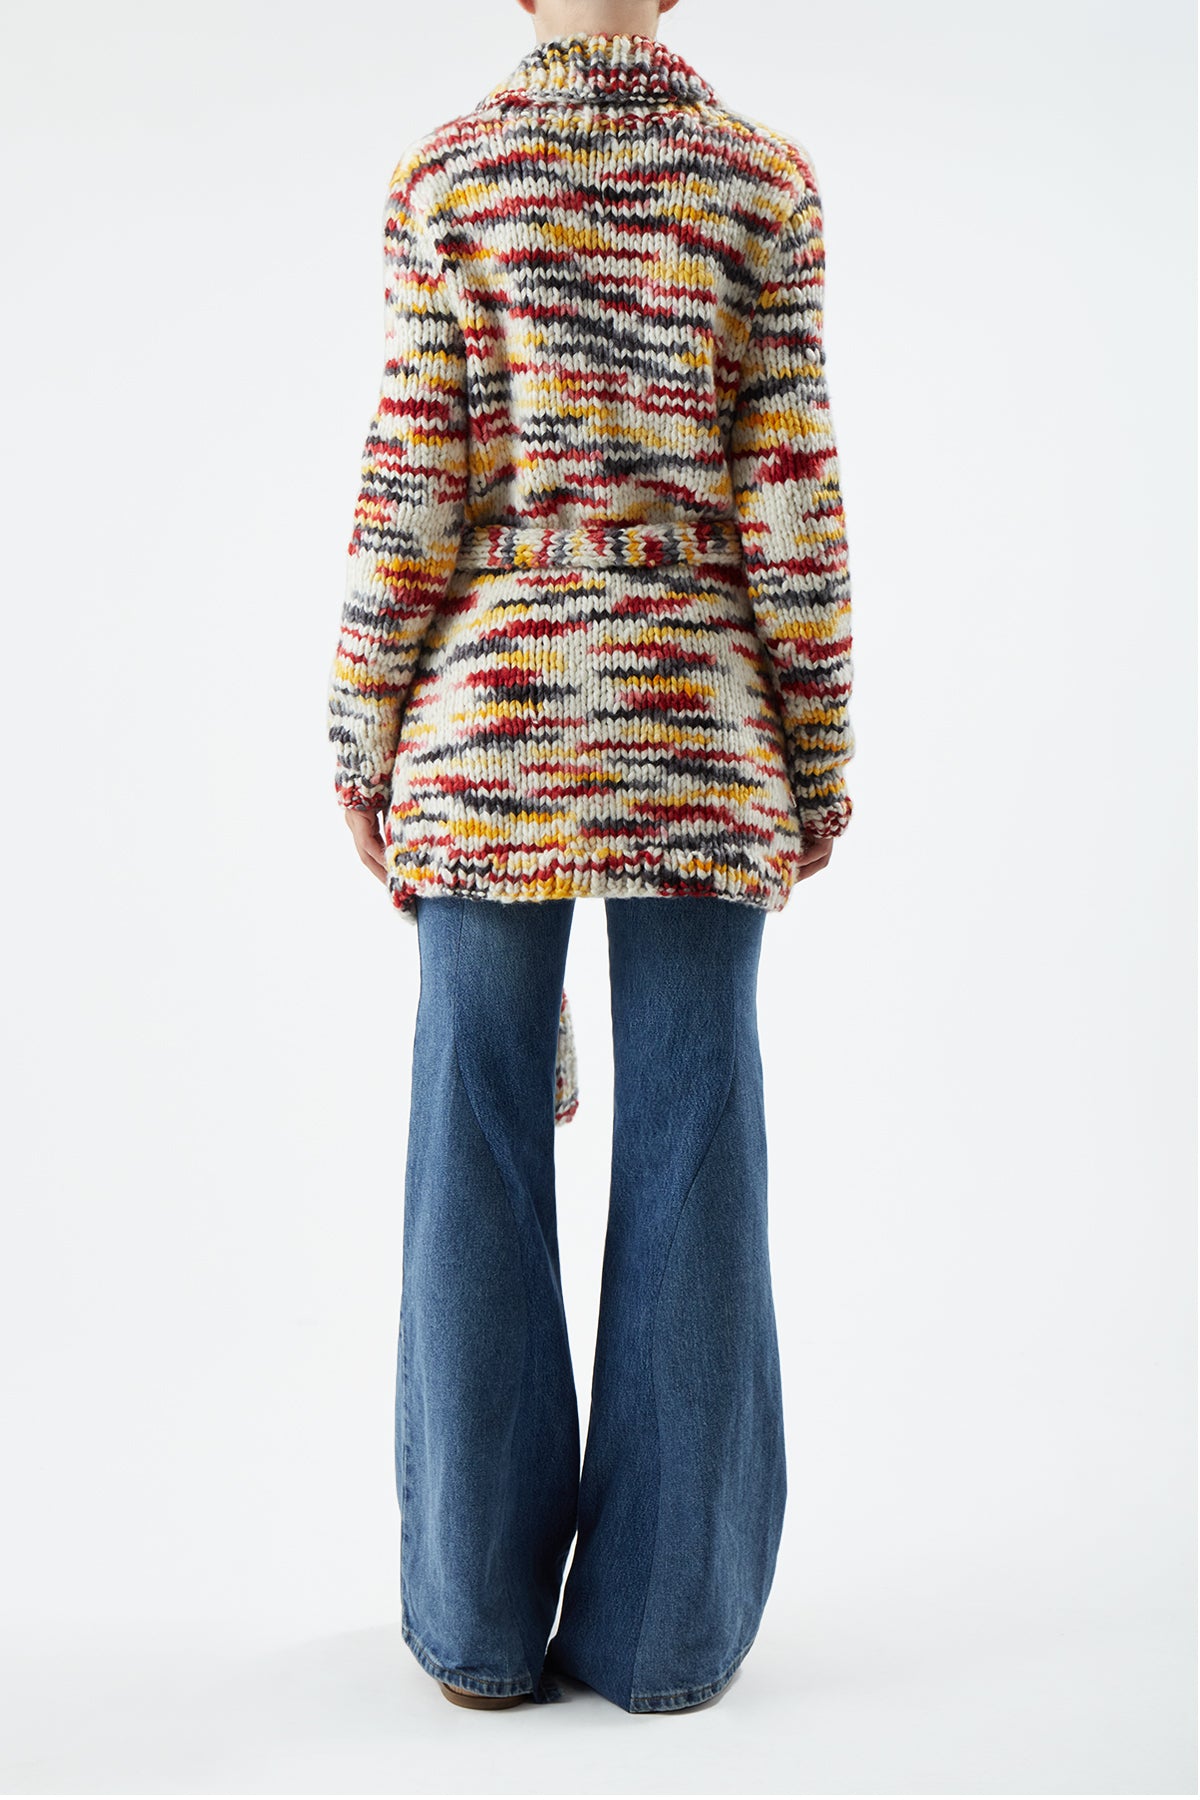 Moses Space Dye Knit Cardigan in Fire Multi Welfat Cashmere